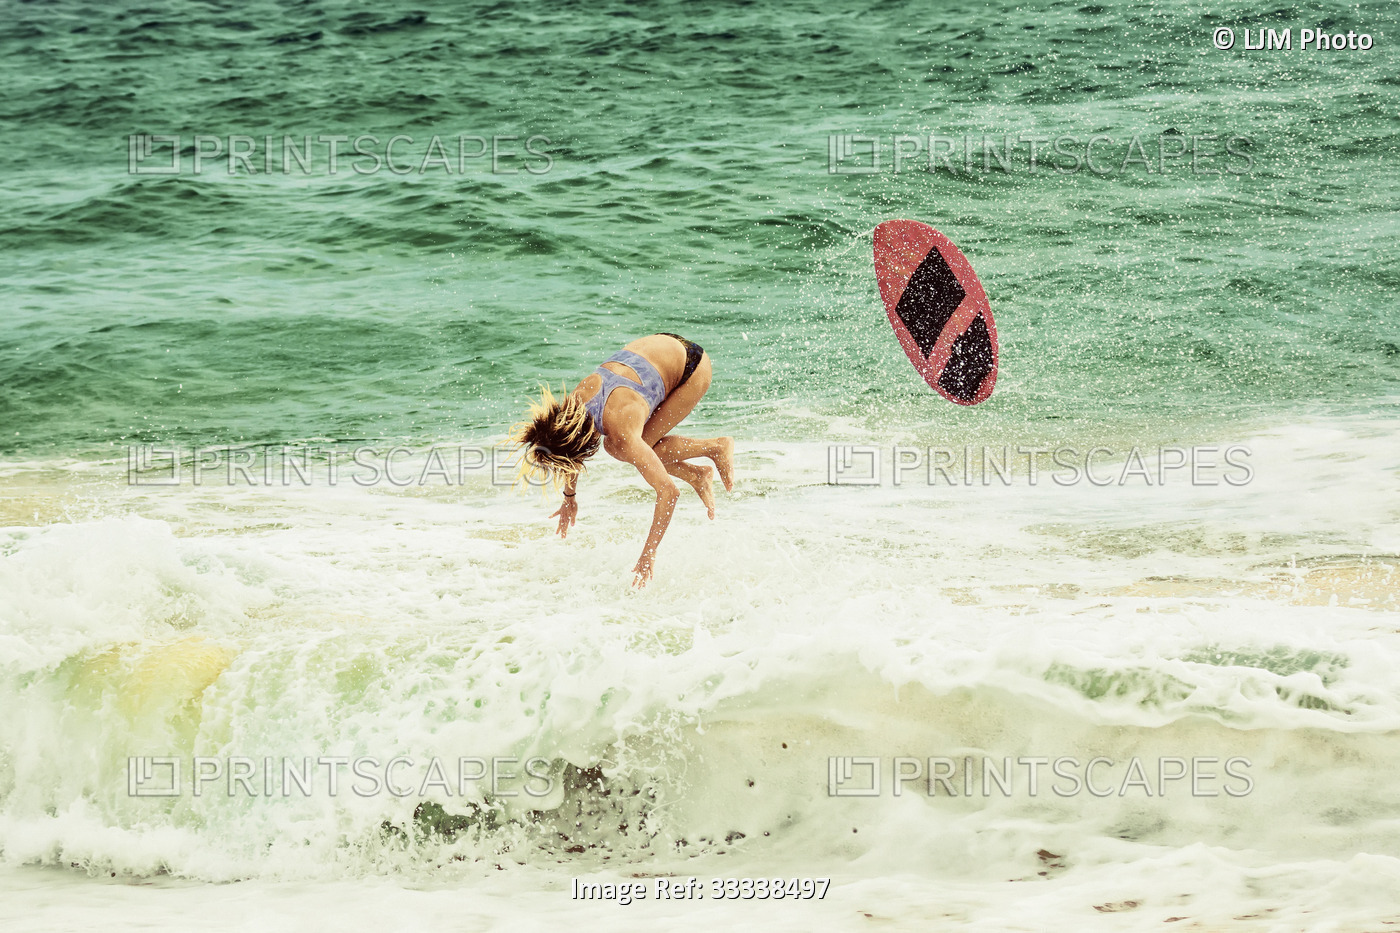 A young professional skimboarder wiping out while riding a wave at Sandy Beach; ...